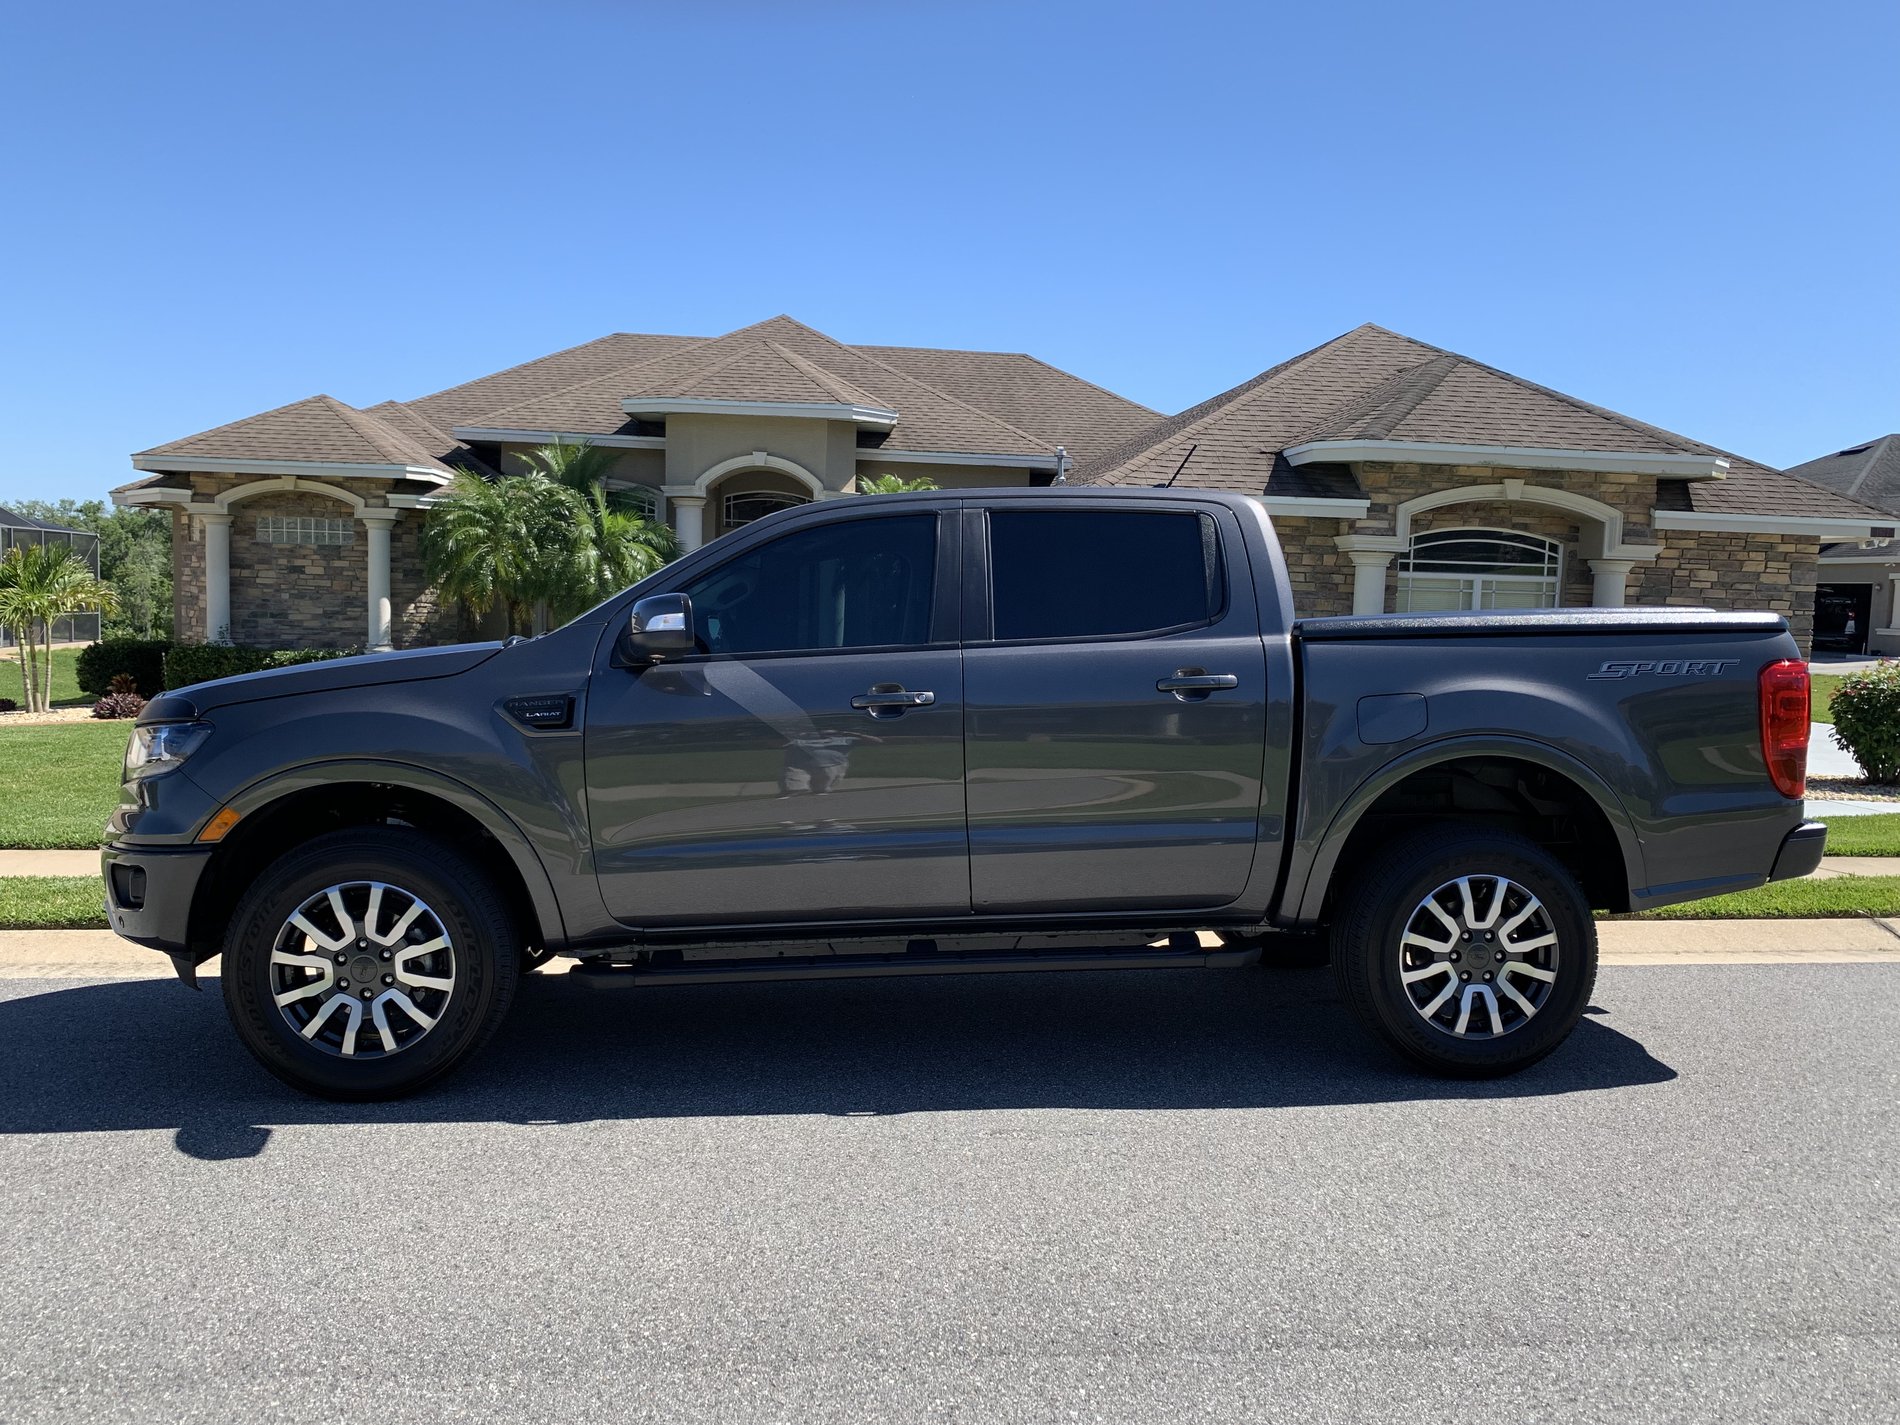 Ford Ranger Lets see your sport package trucks C79E1279-E339-4C7A-9DD0-5E1261CF7C11